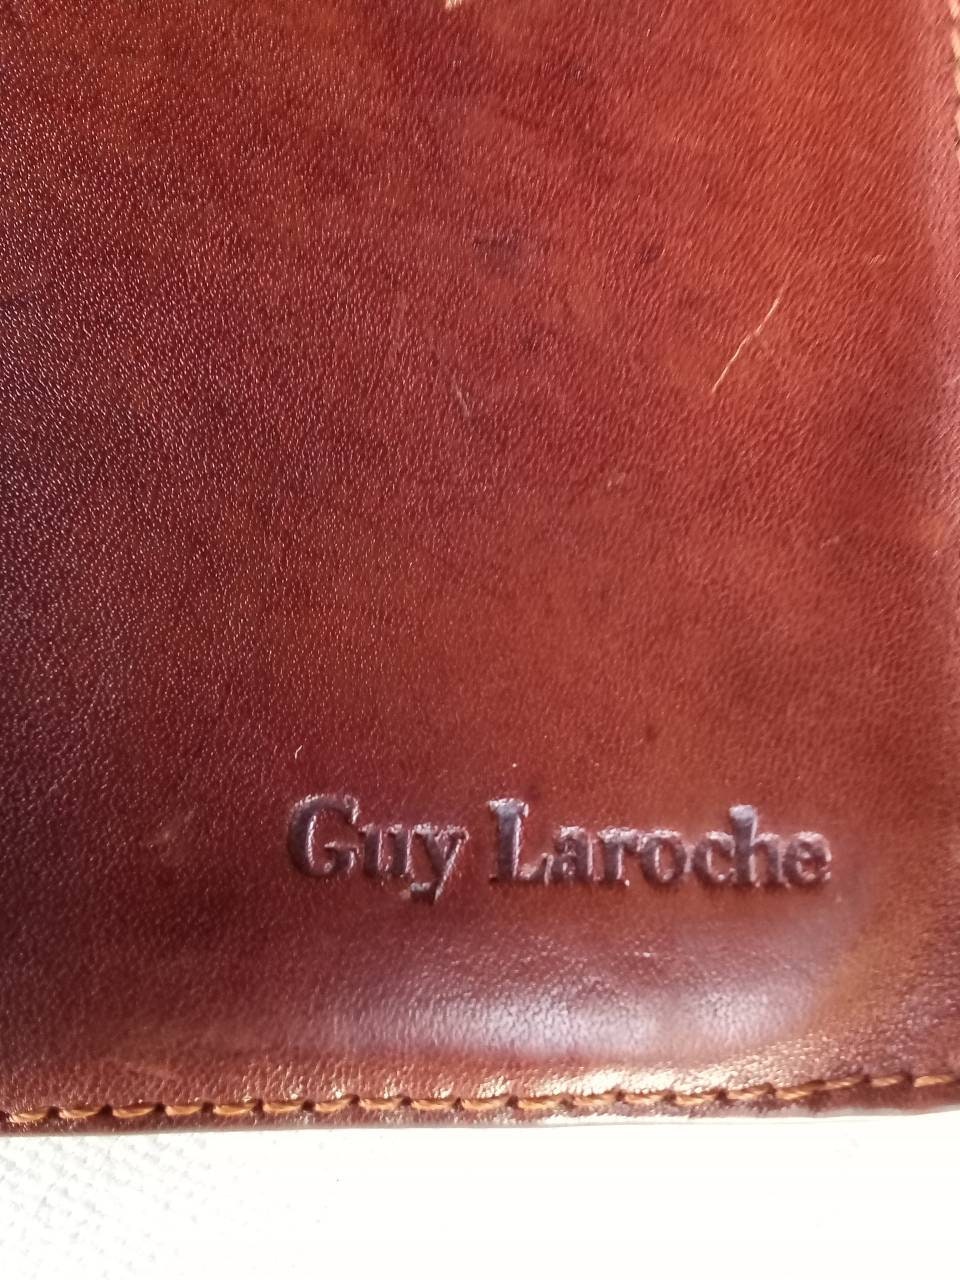 ✨Guy Laroche Bag for - Europa Maung Branded Collection